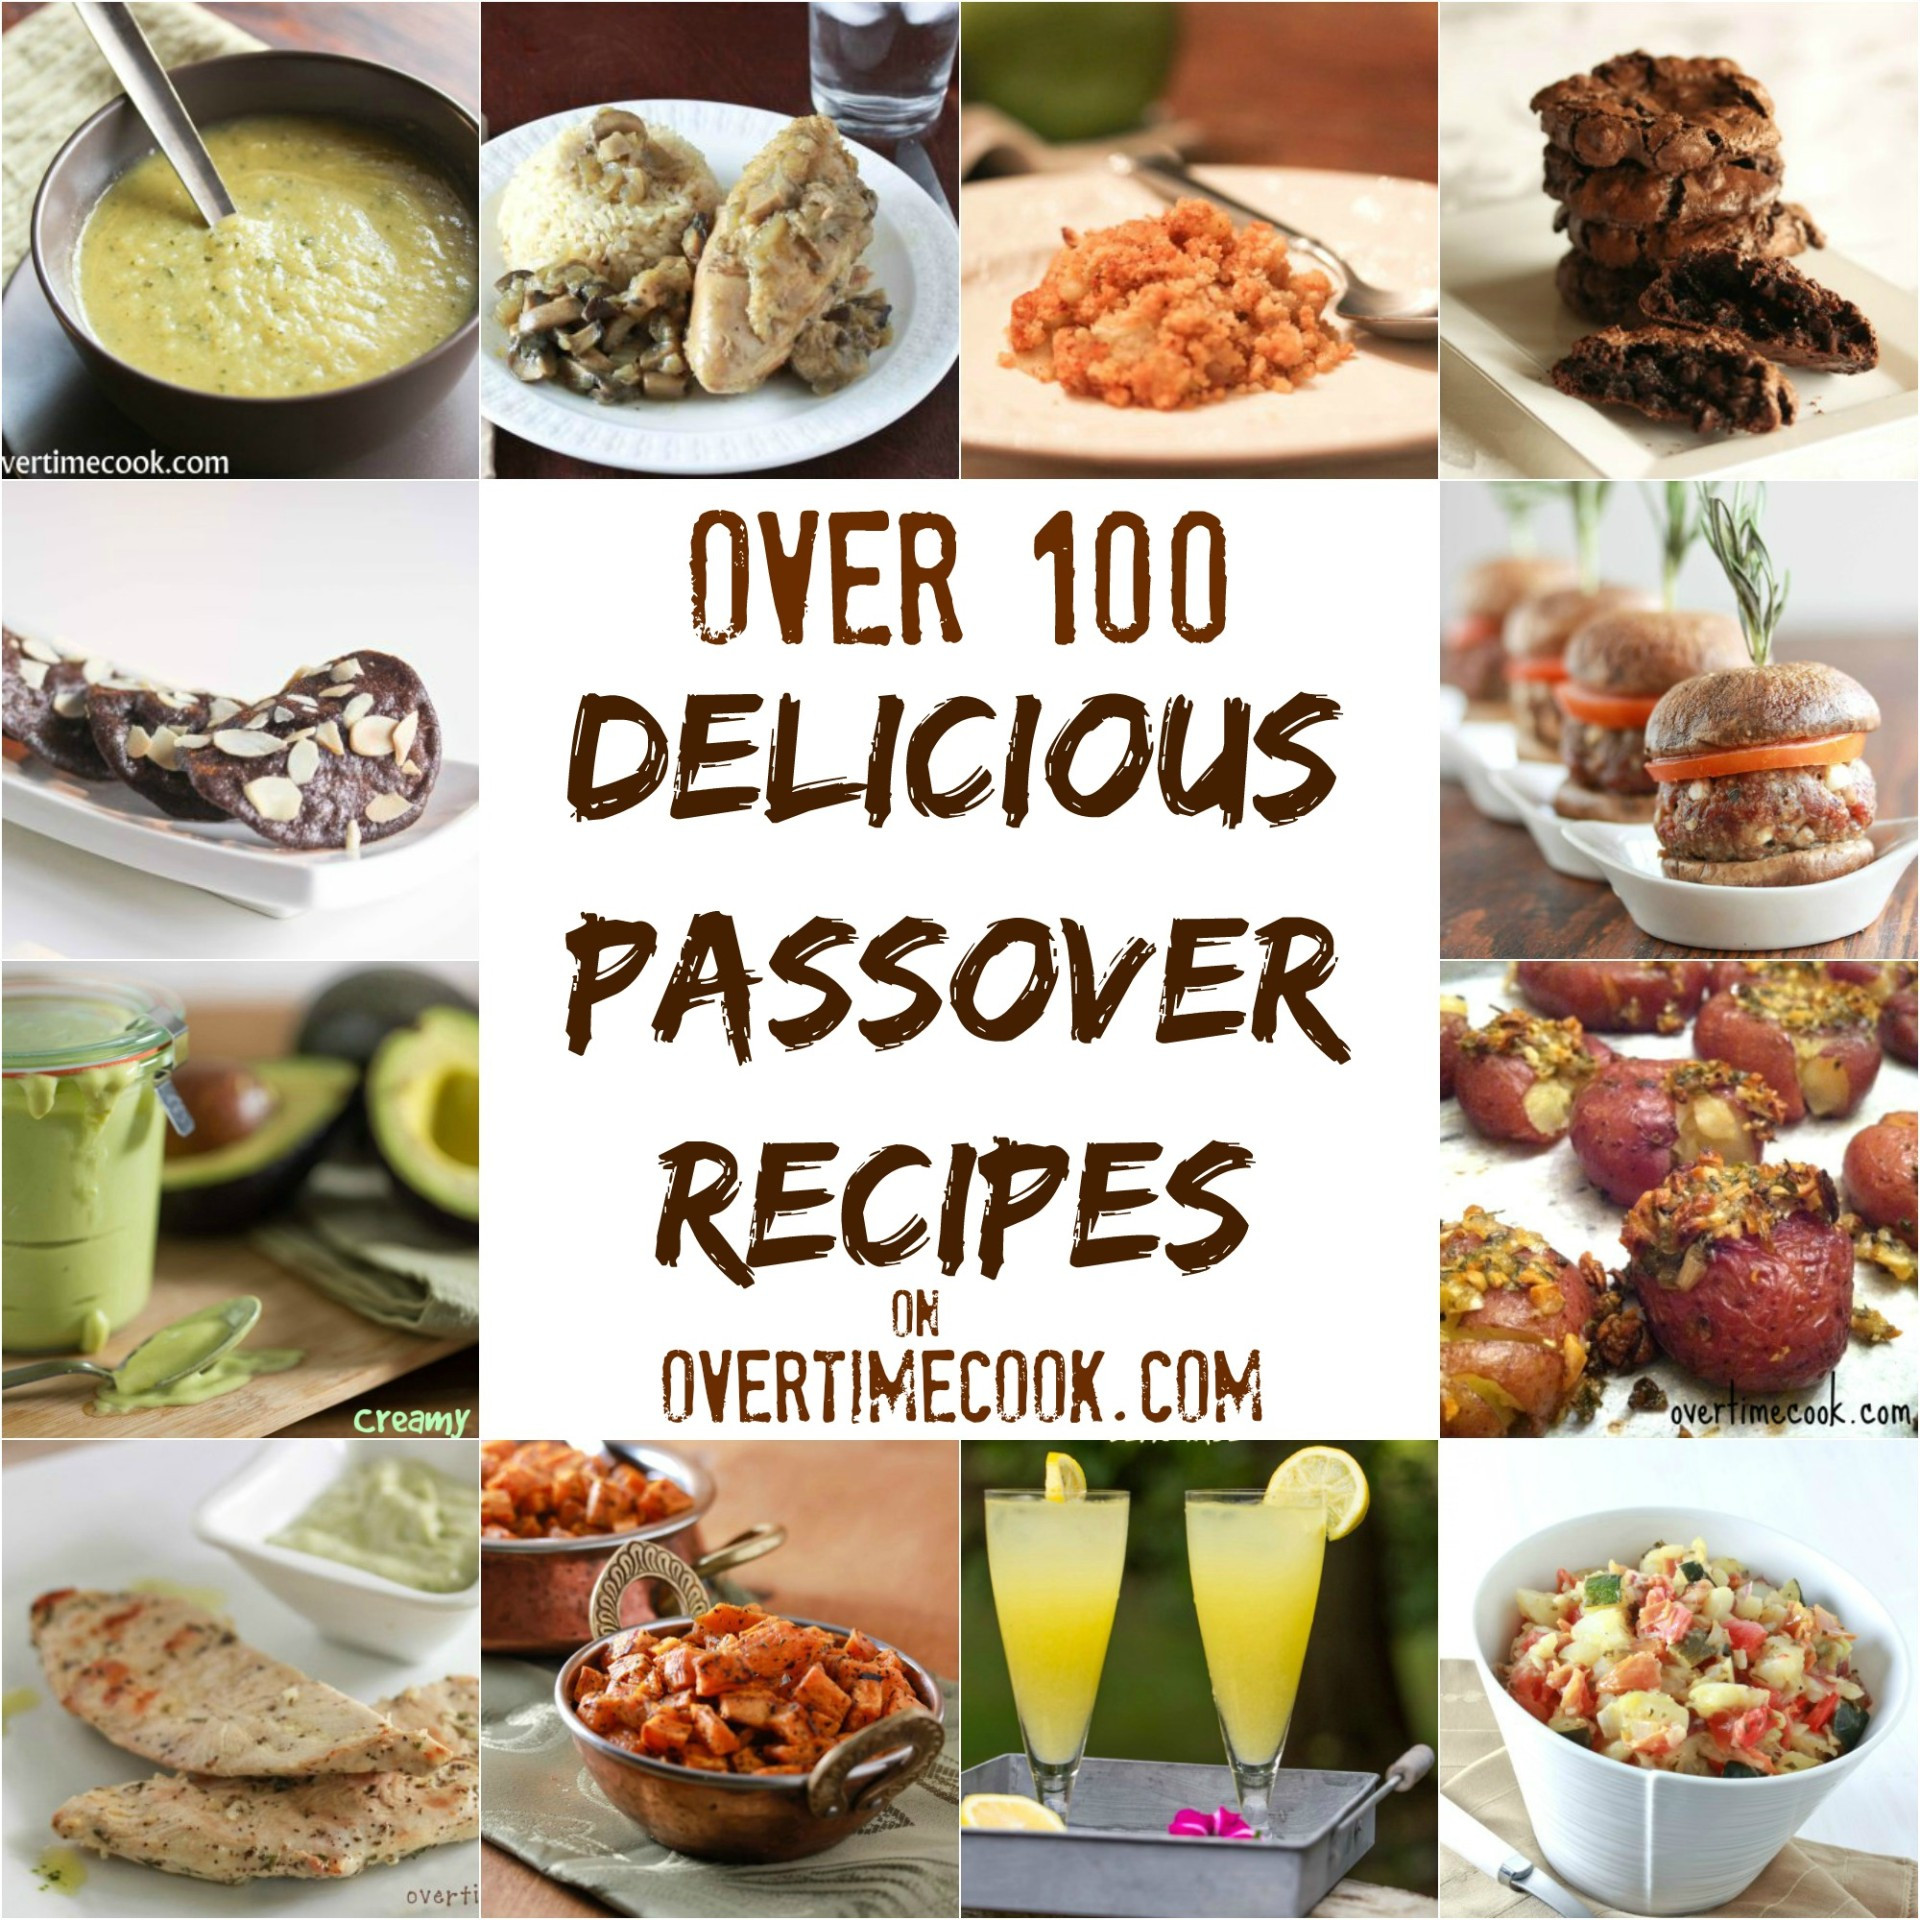 Passover Seder Recipe
 Over 100 Delicious Passover Recipes Overtime Cook